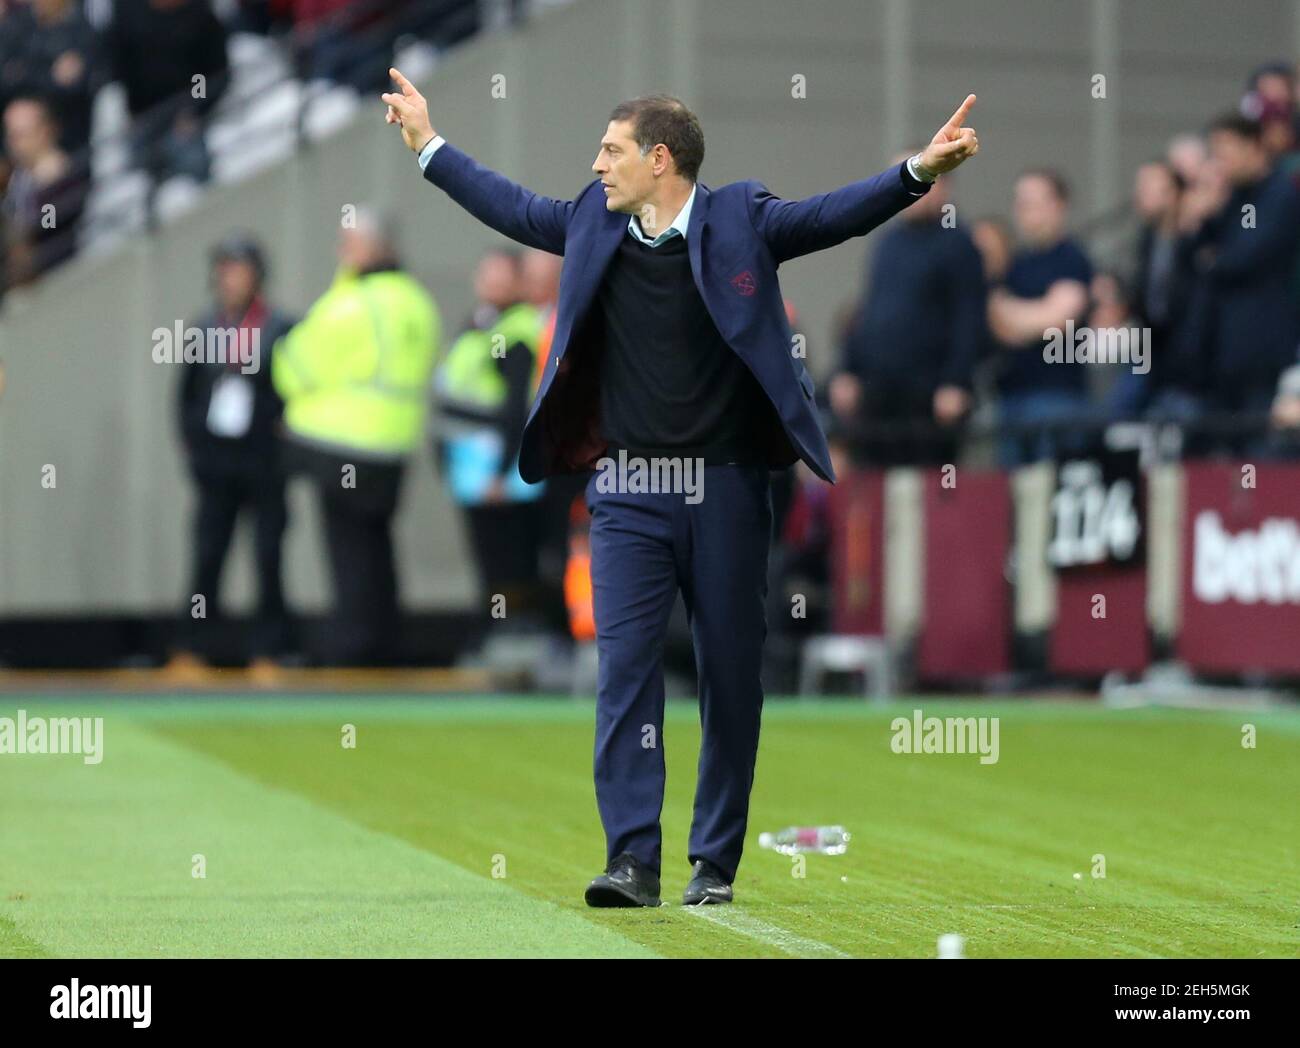 Britain Soccer Football - West Ham United v Sunderland - Premier League - London Stadium - 22/10/16 West Ham United manager Slaven Bilic Reuters / Paul Hackett Livepic EDITORIAL USE ONLY. No use with unauthorized audio, video, data, fixture lists, club/league logos or 'live' services. Online in-match use limited to 45 images, no video emulation. No use in betting, games or single club/league/player publications.  Please contact your account representative for further details. Stock Photo